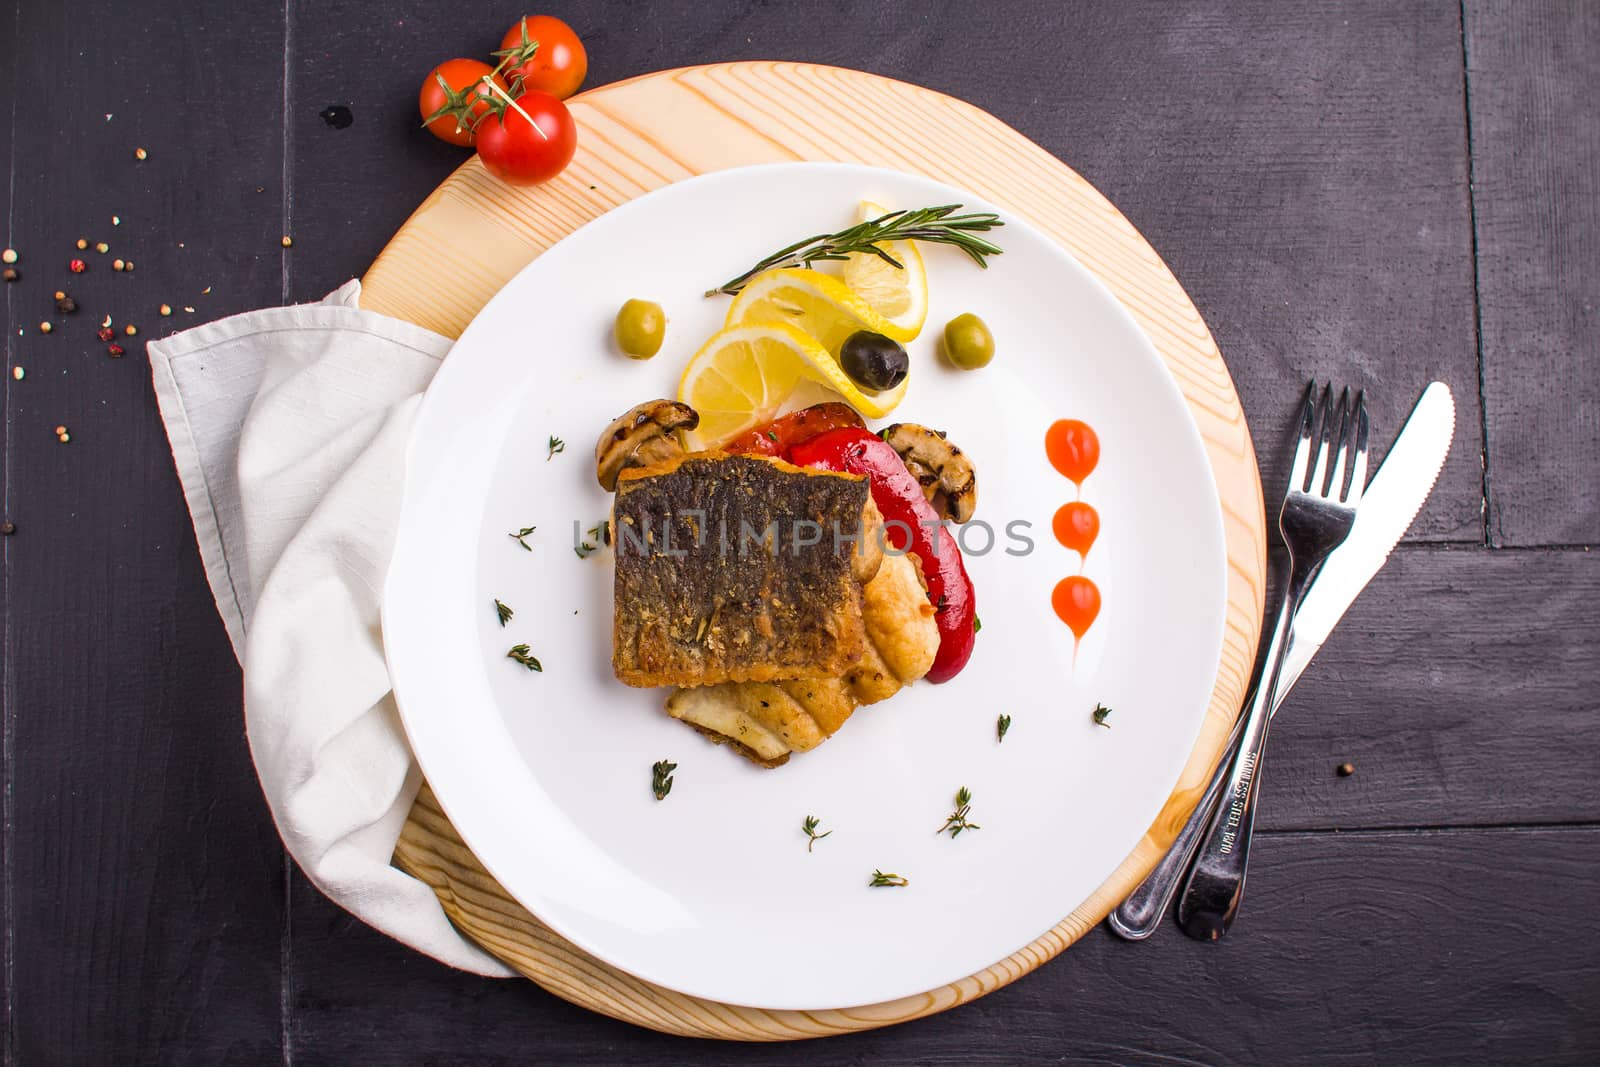 Grilled fish steak with vegetables by mrakor